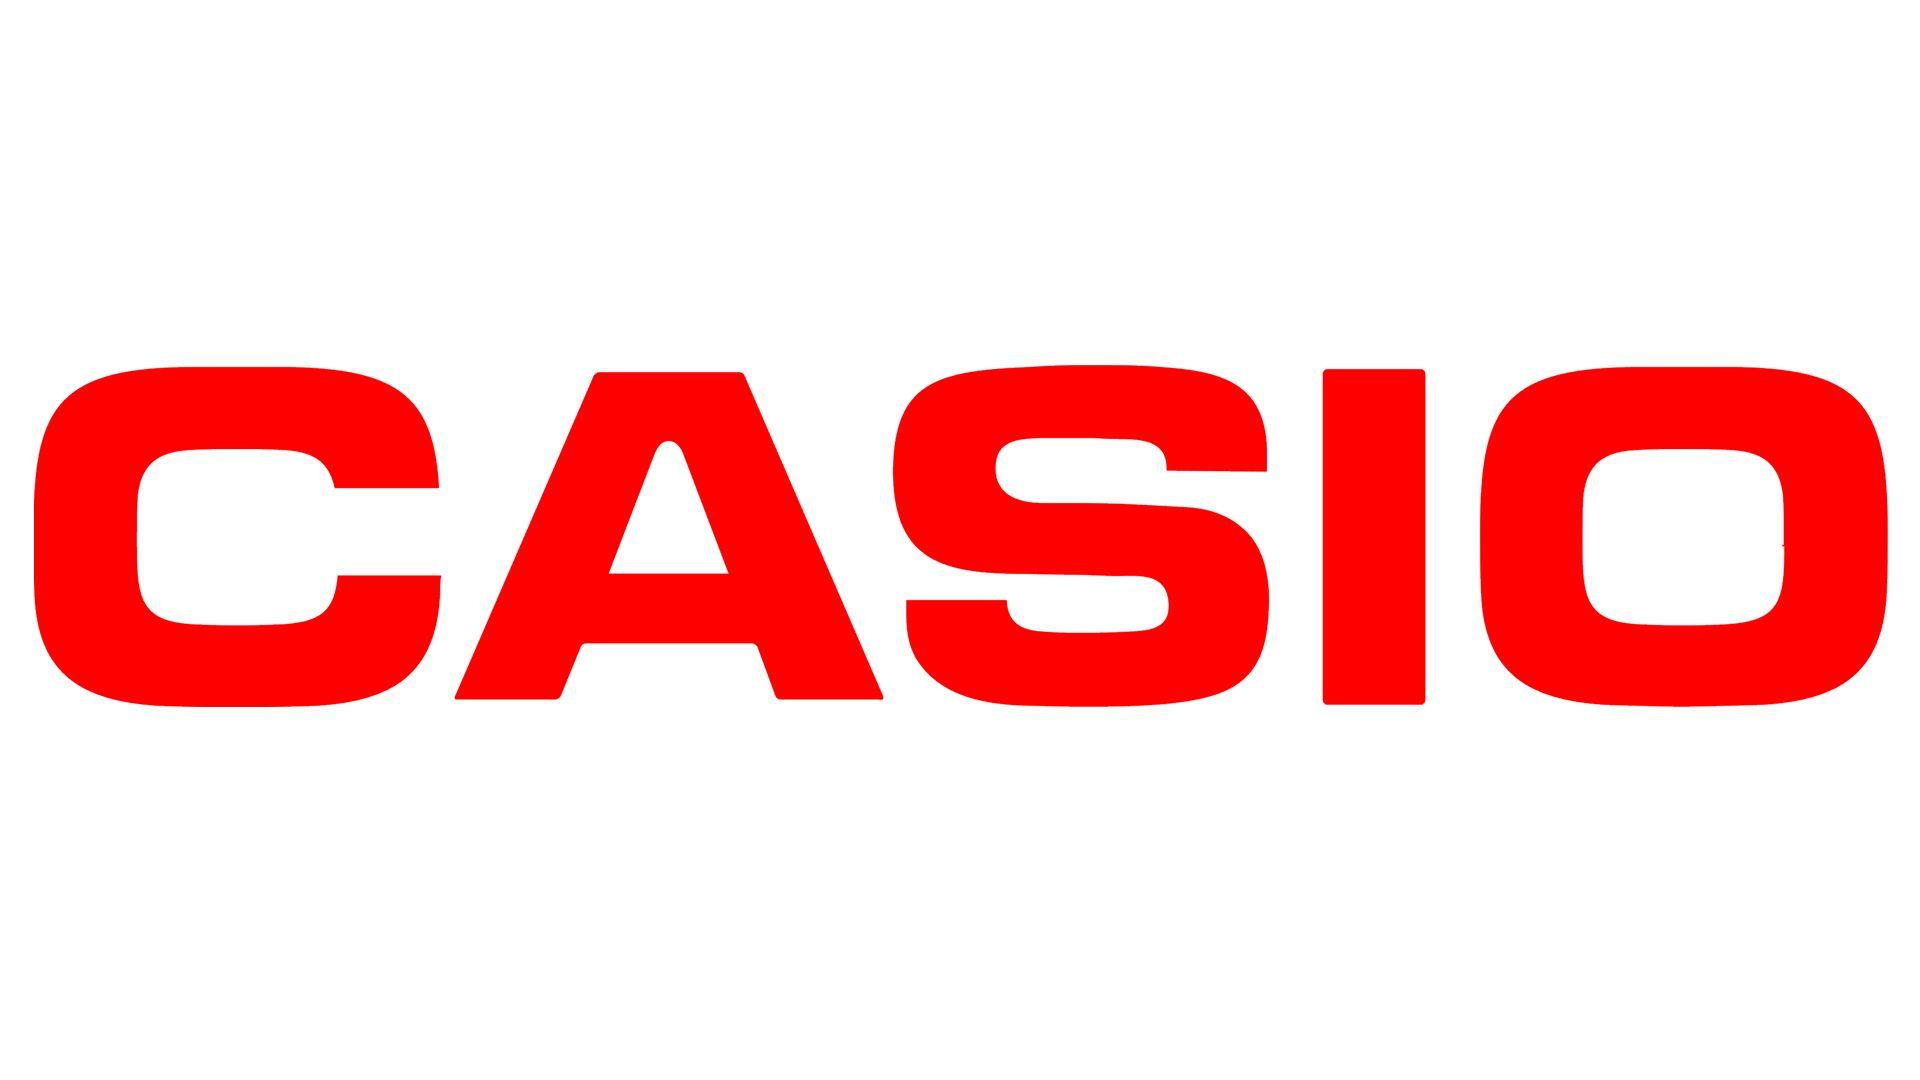 If I with Red Logo - Casio Logo, Casio Symbol, Meaning, History and Evolution